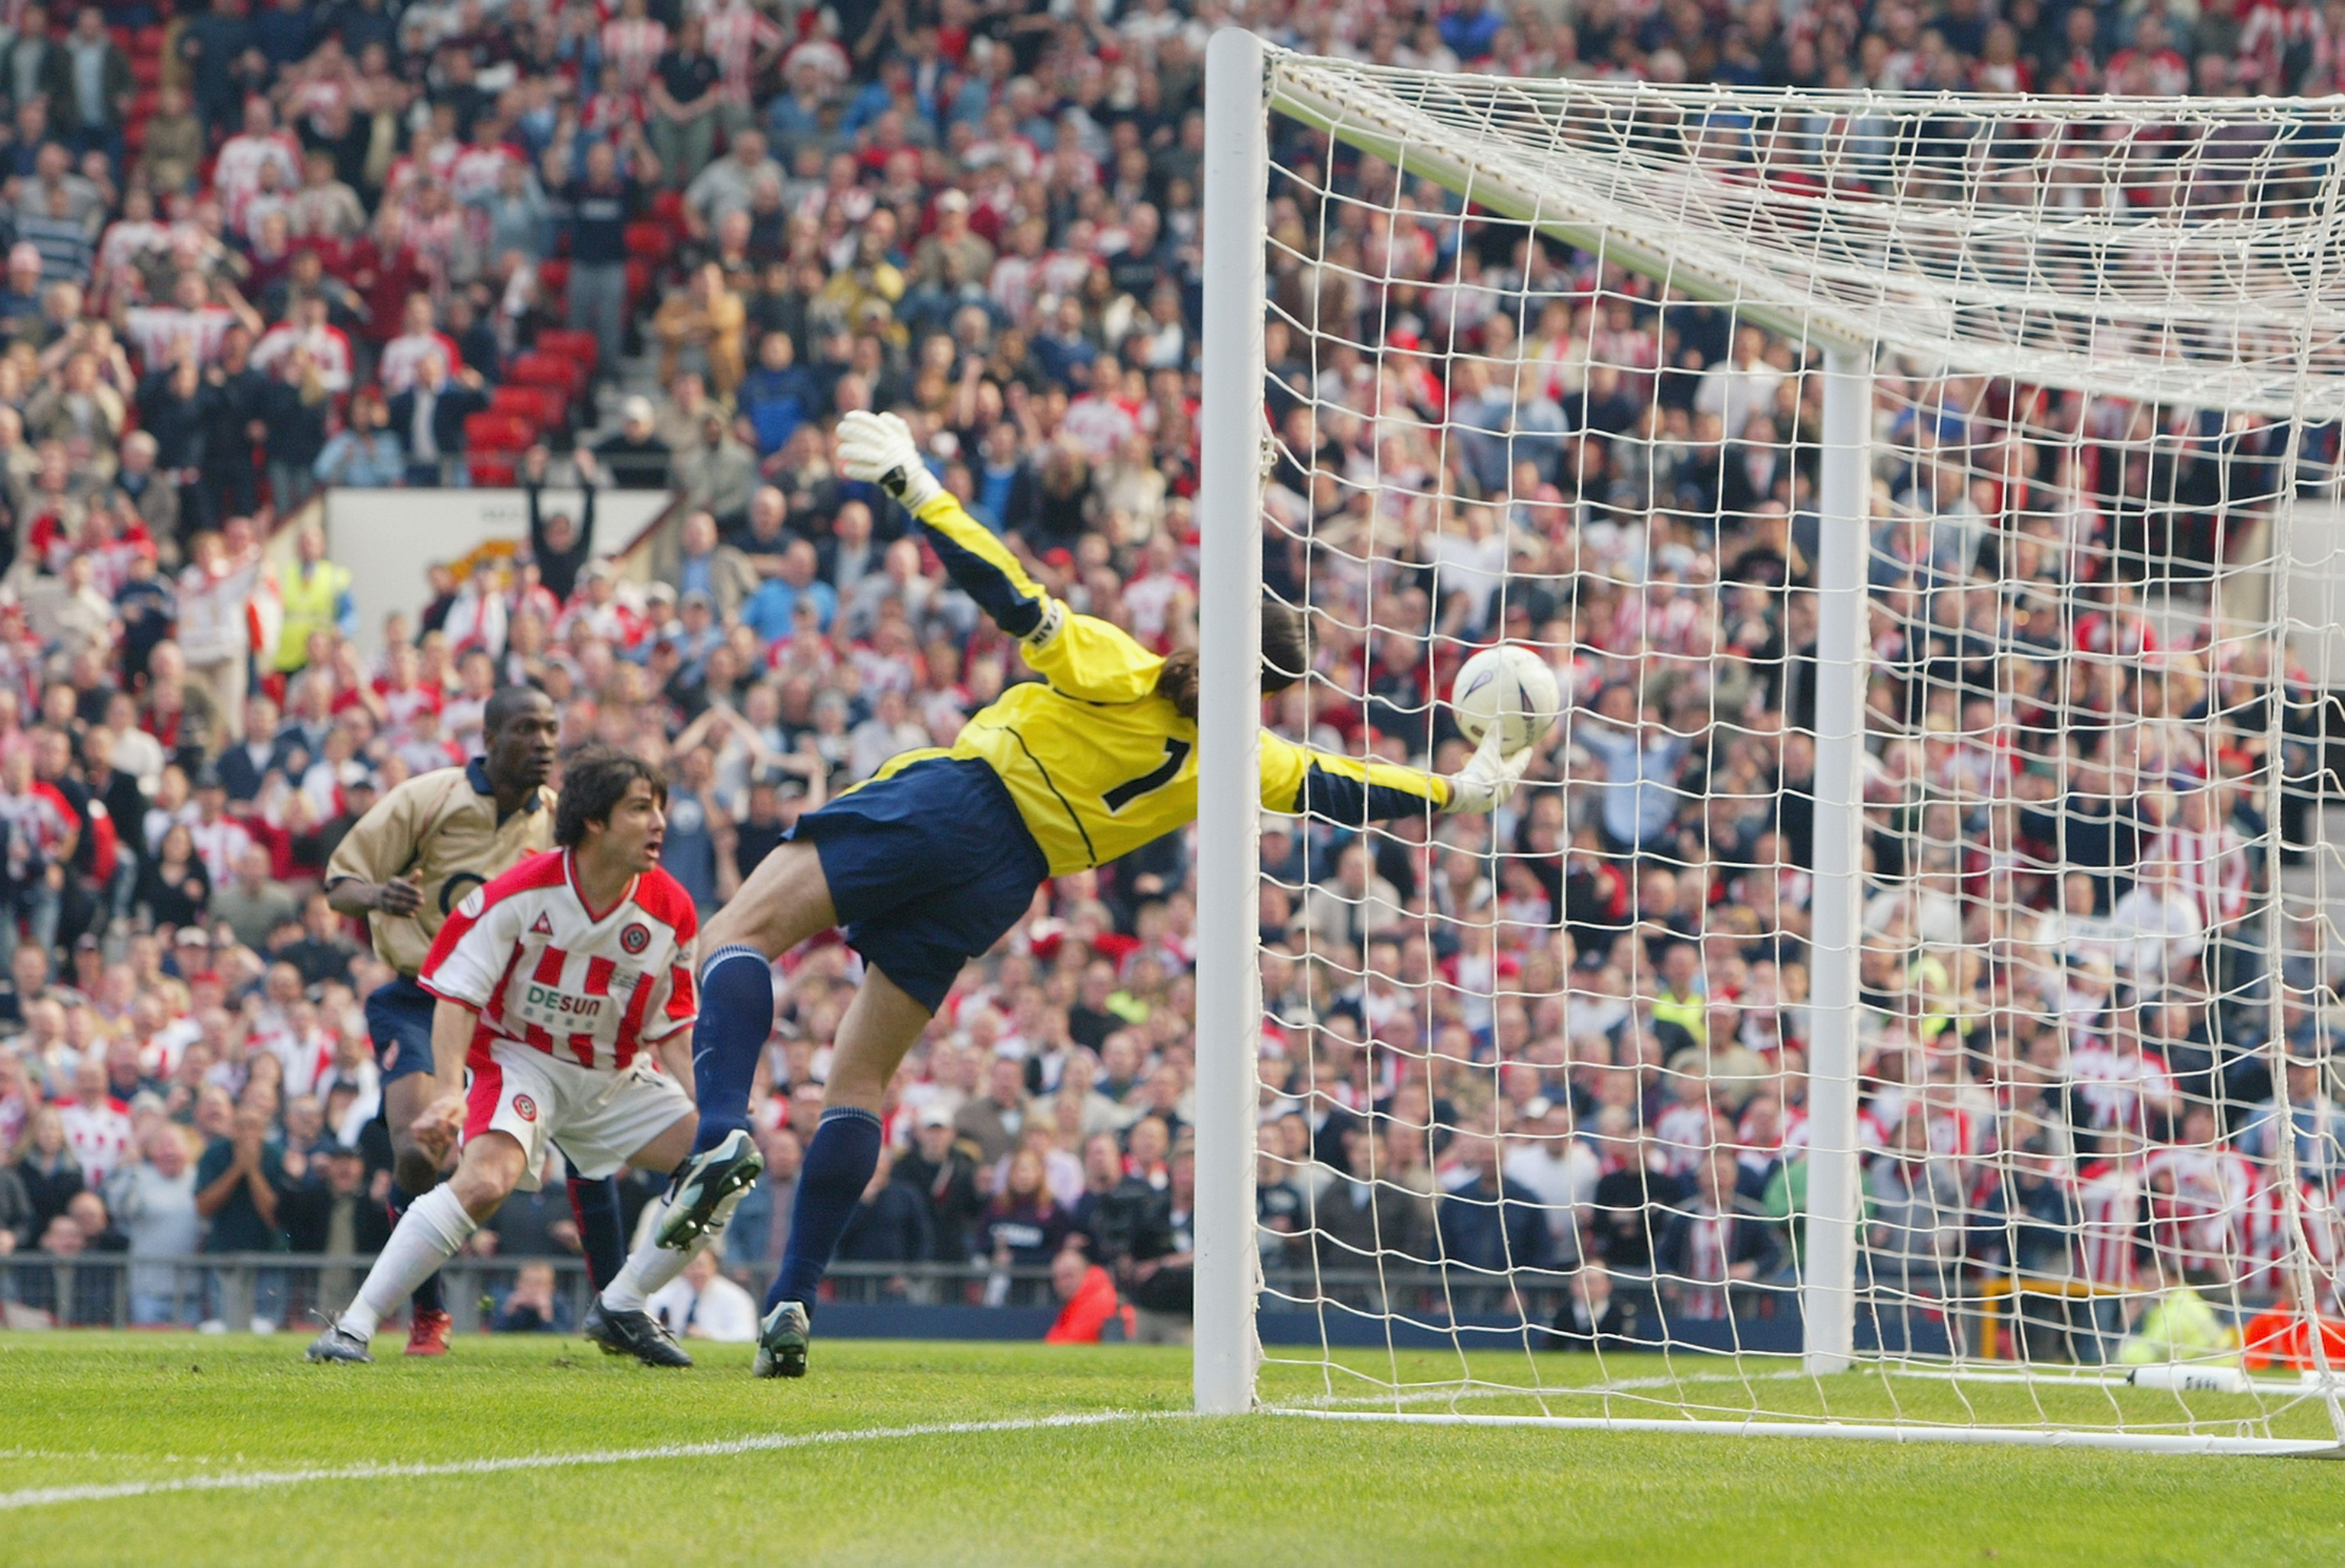 MANCHESTER - APRIL 13:  (FILE PHOTO) David Seaman of Arsenal makes a spectacular save to keep the ball out during the FA Cup Semi-Final match between Arsenal and Sheffield United held on April 13, 2003 at Old Trafford, in Manchester, England. David Seaman